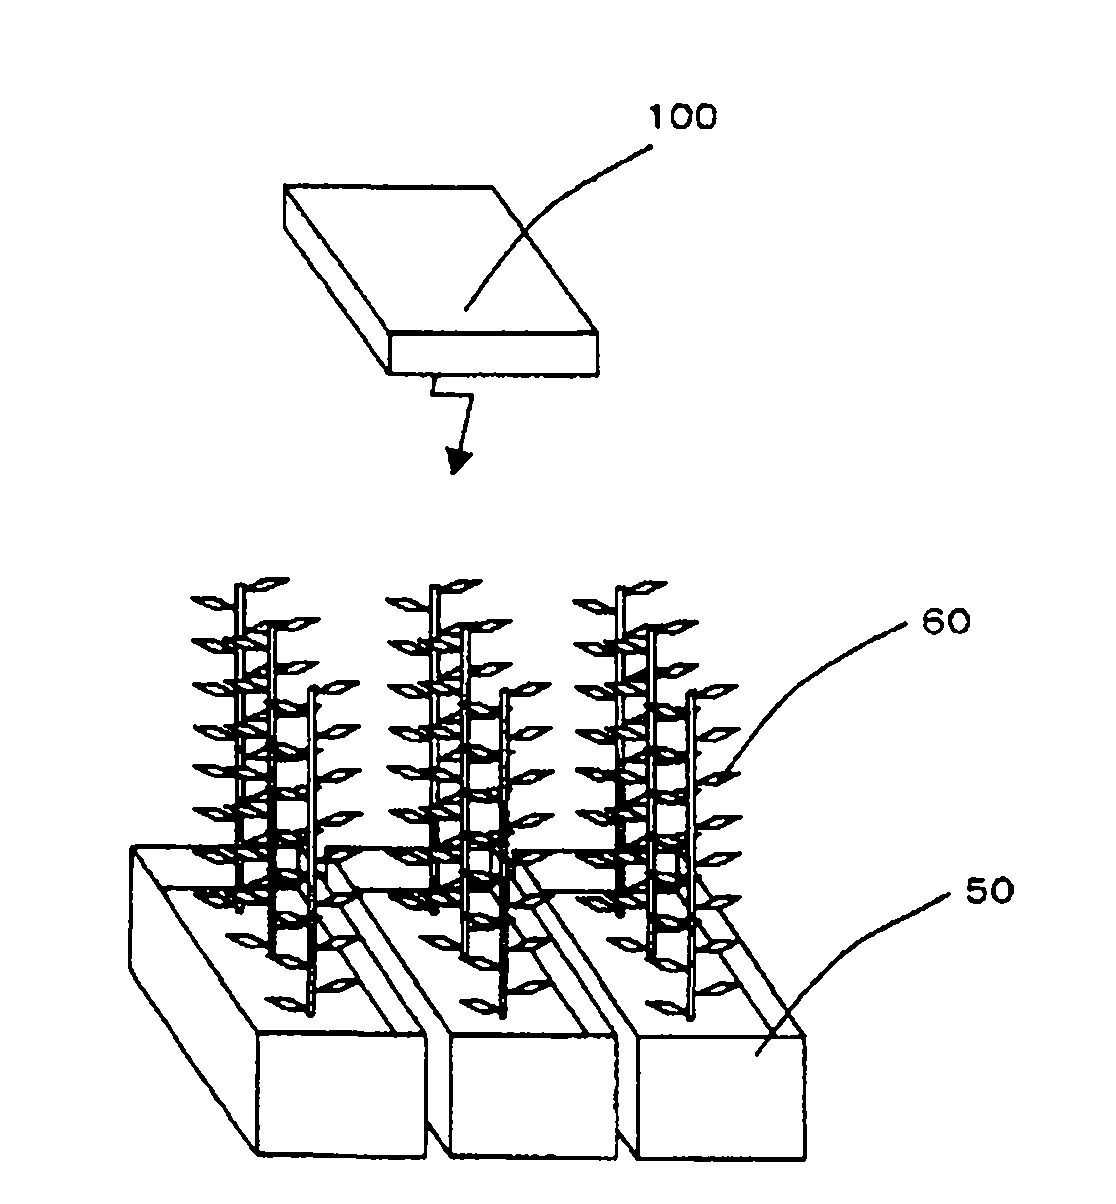 Plant illumination and cultivation method that provides insect-screening effects and illumination device for plant cultivation